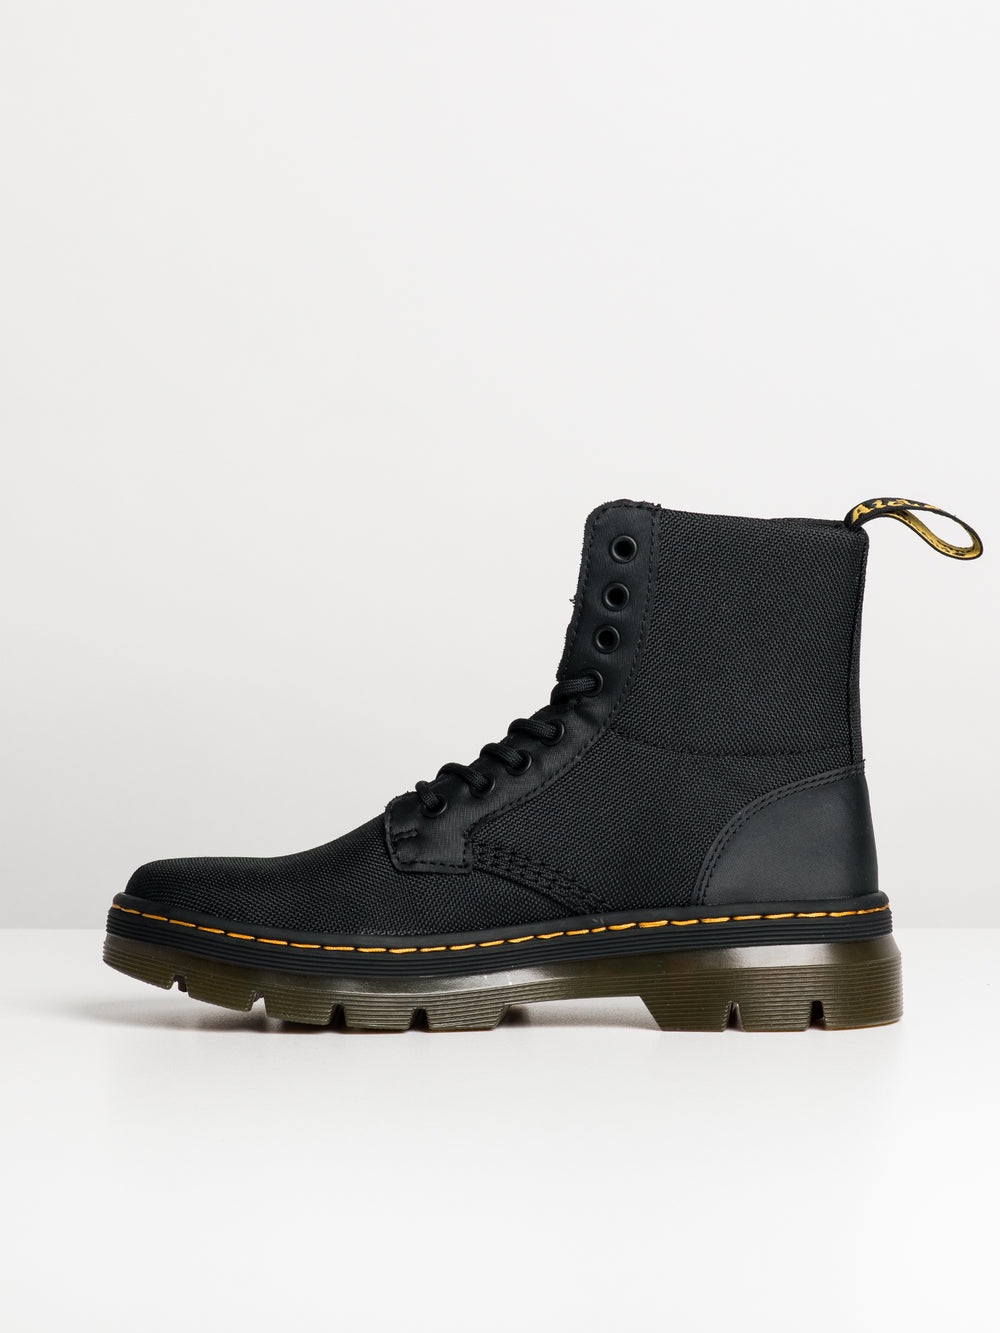 MENS DR MARTENS COMBS BOOT - CLEARANCE